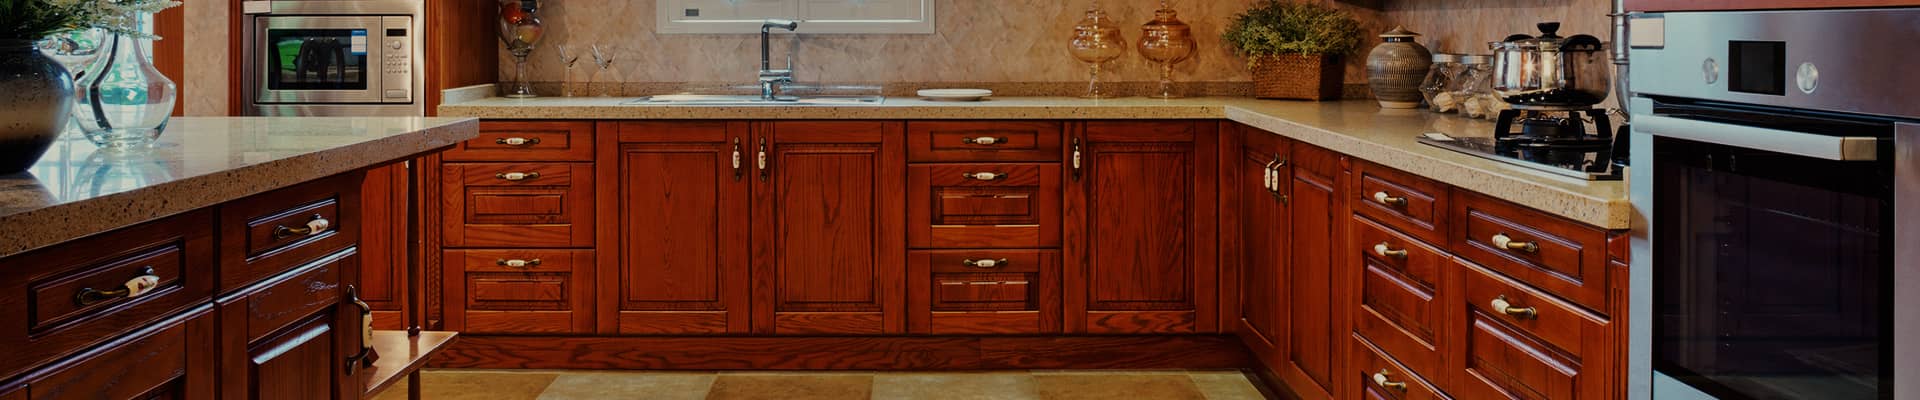 New Kitchen Cabinets — Medford, OR — Gary Smith Custom Cabinet Shop